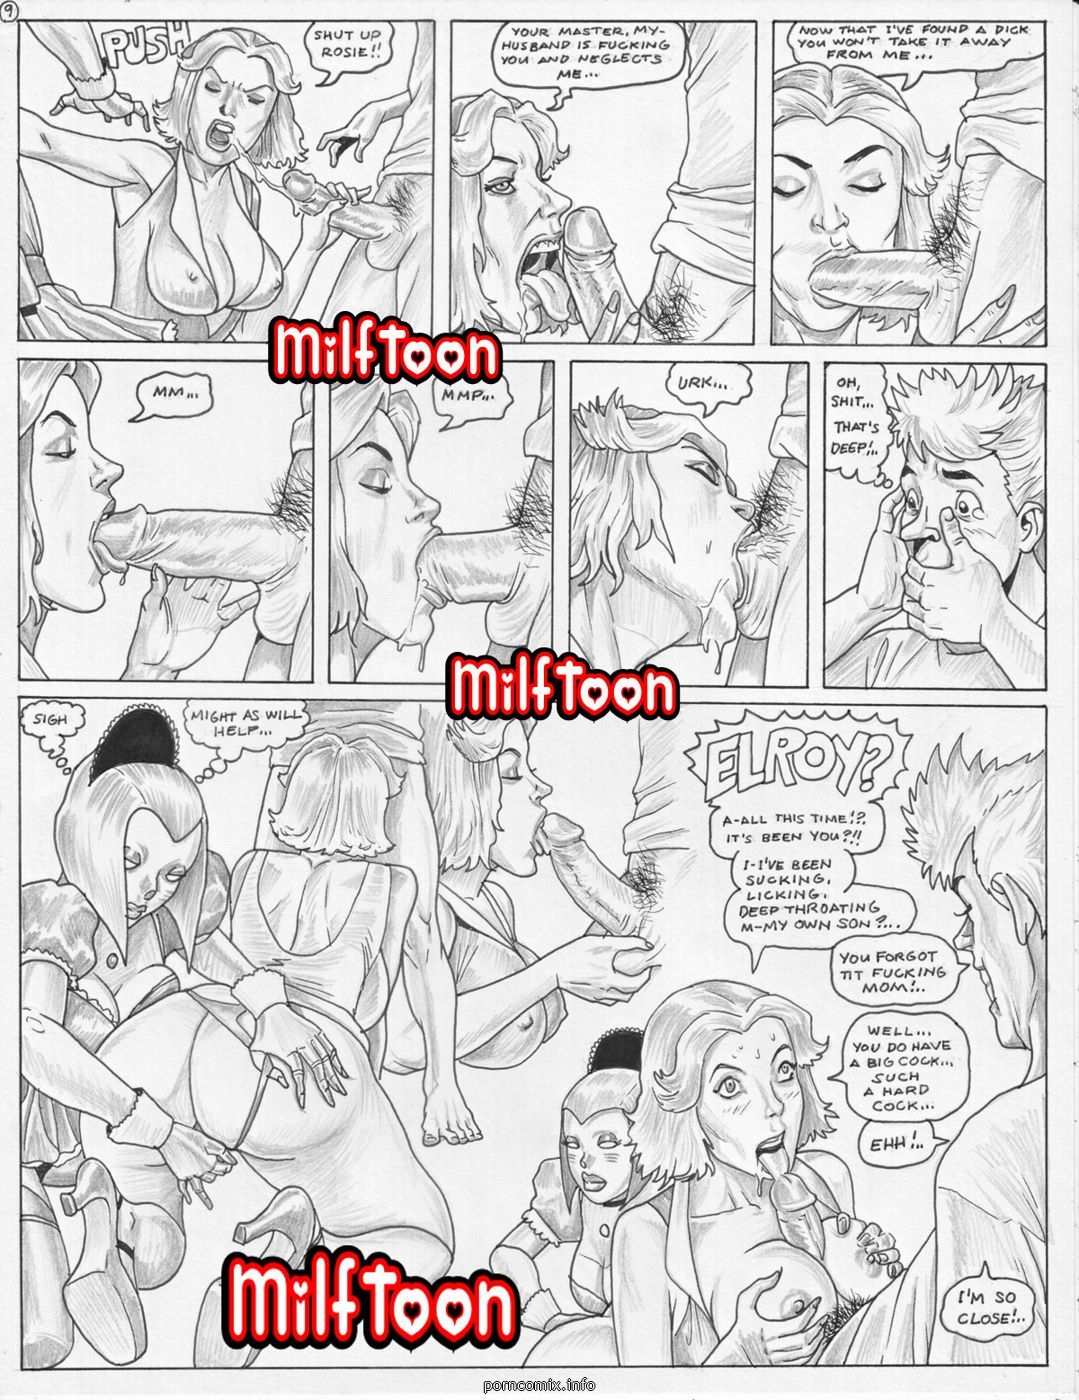 Milftoon - Jepsons page 10